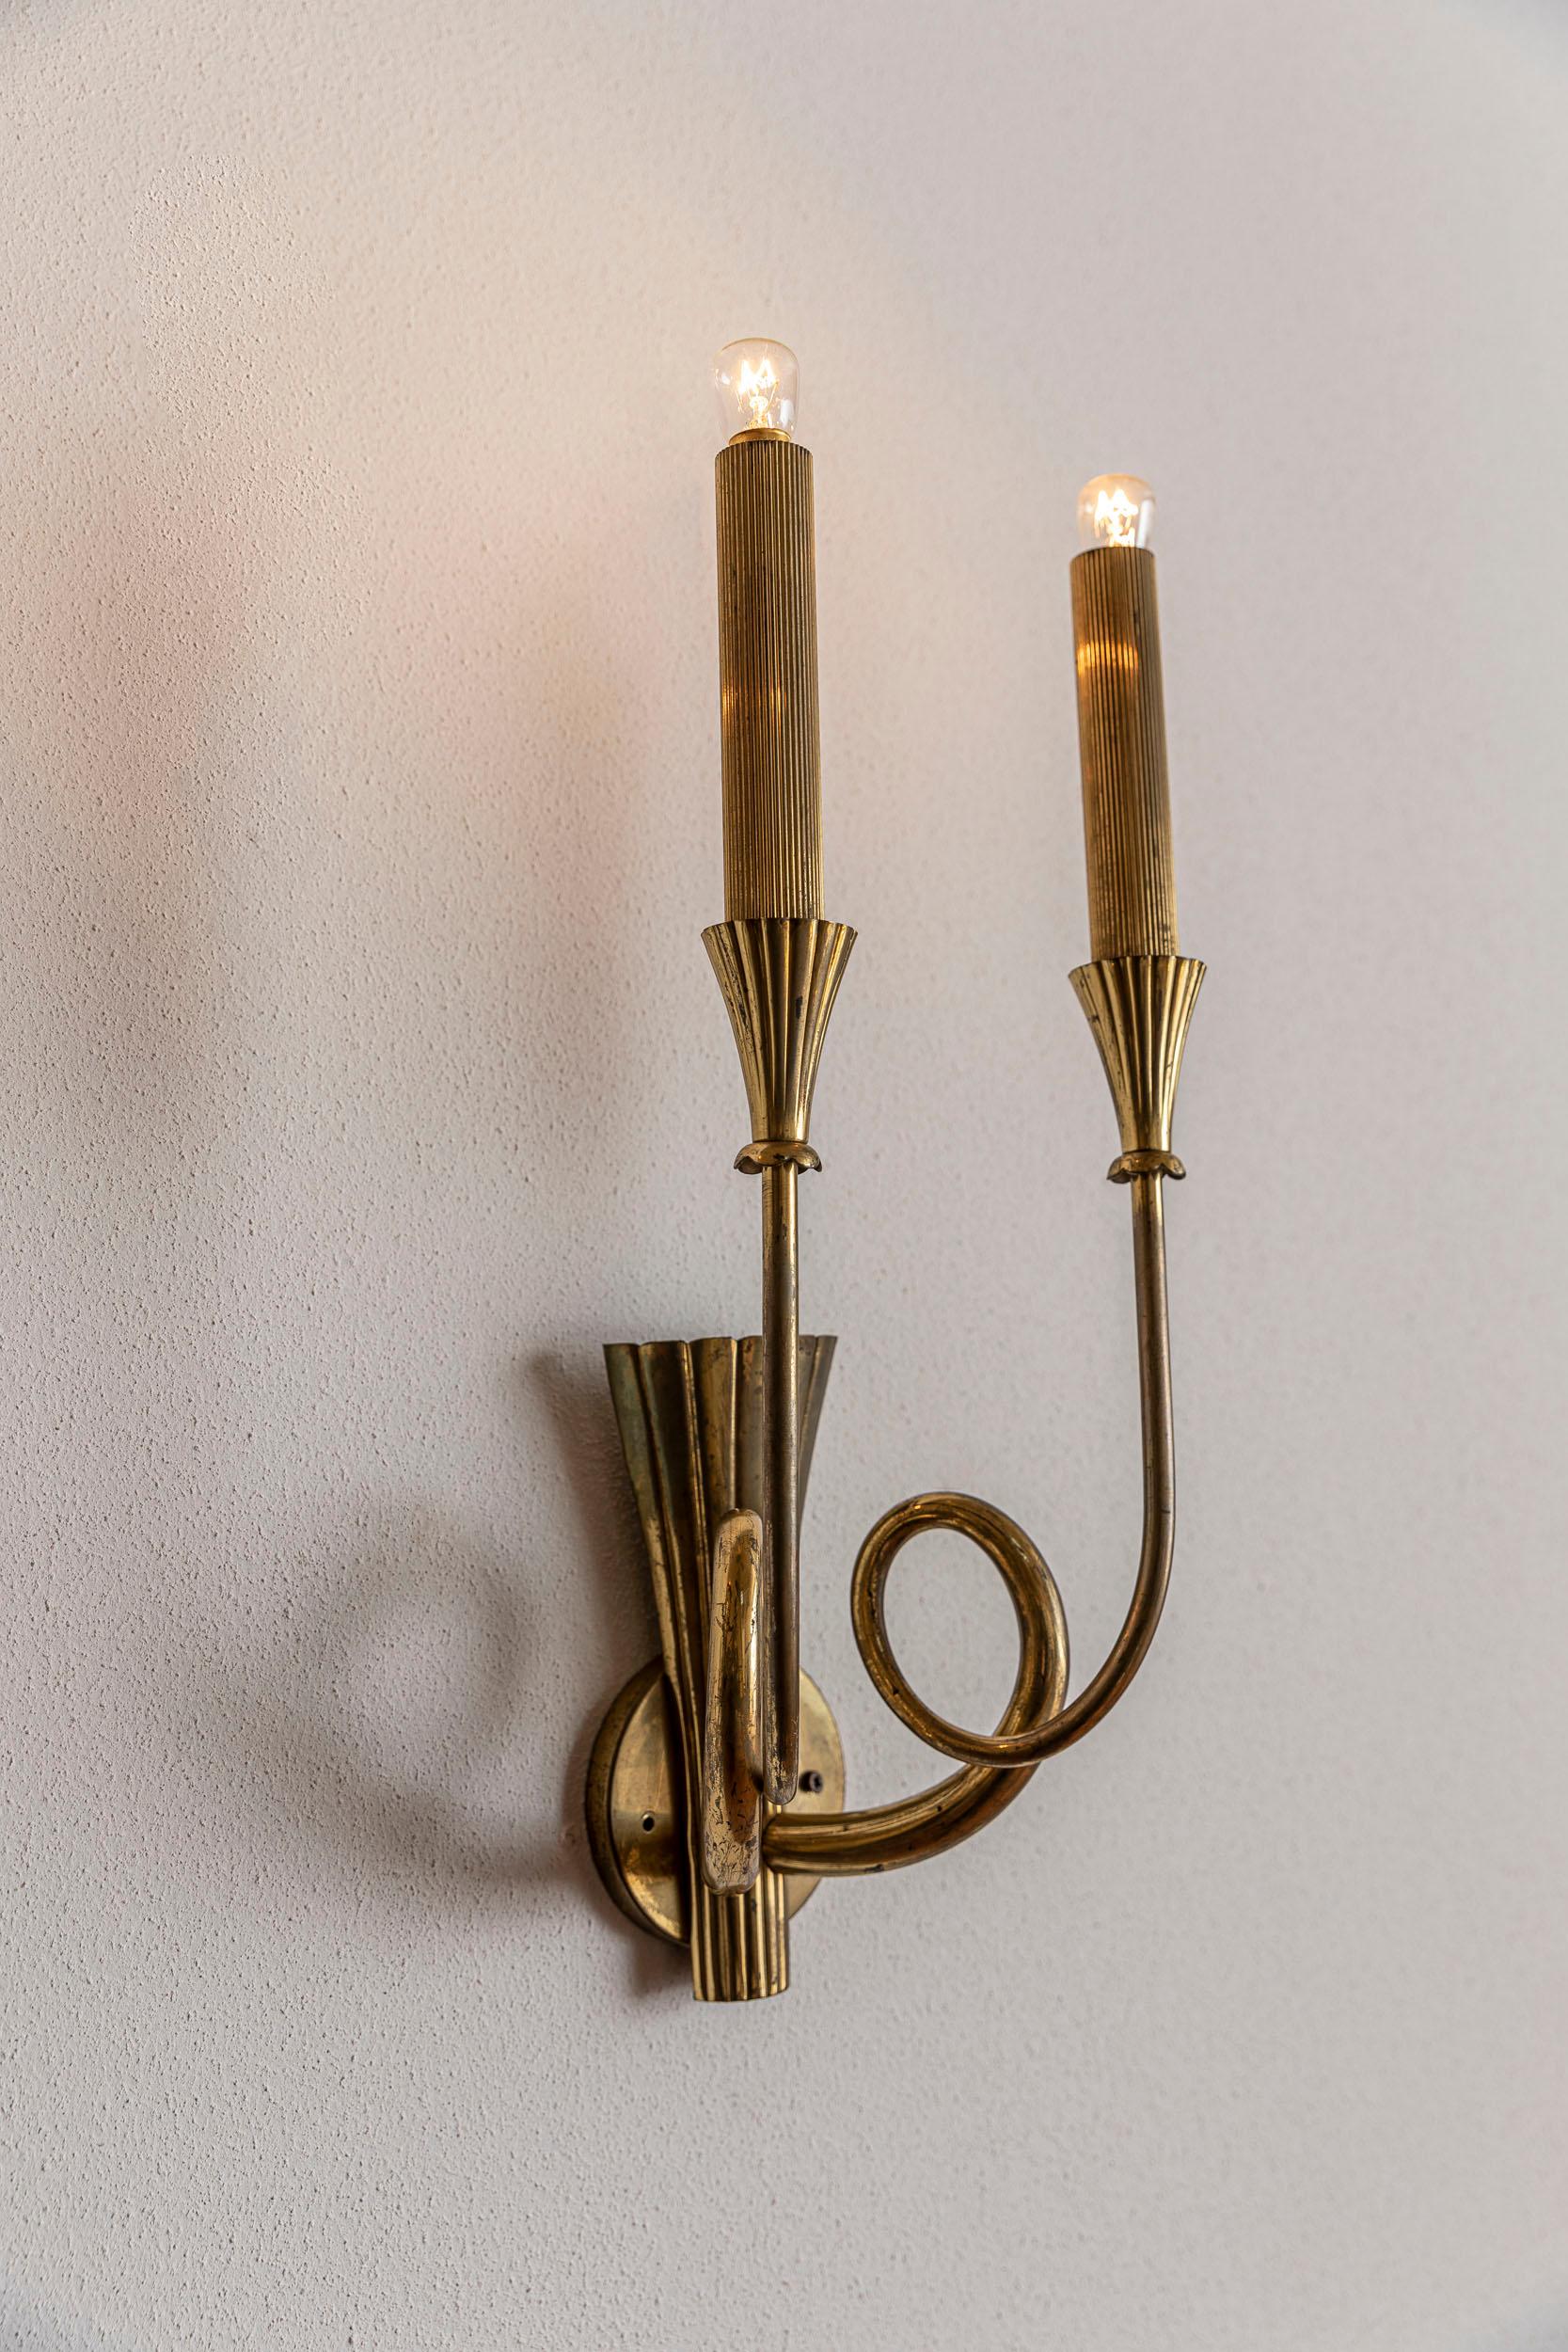 Italian Midcentury Brass Wall Lights In Good Condition In Piacenza, Italy